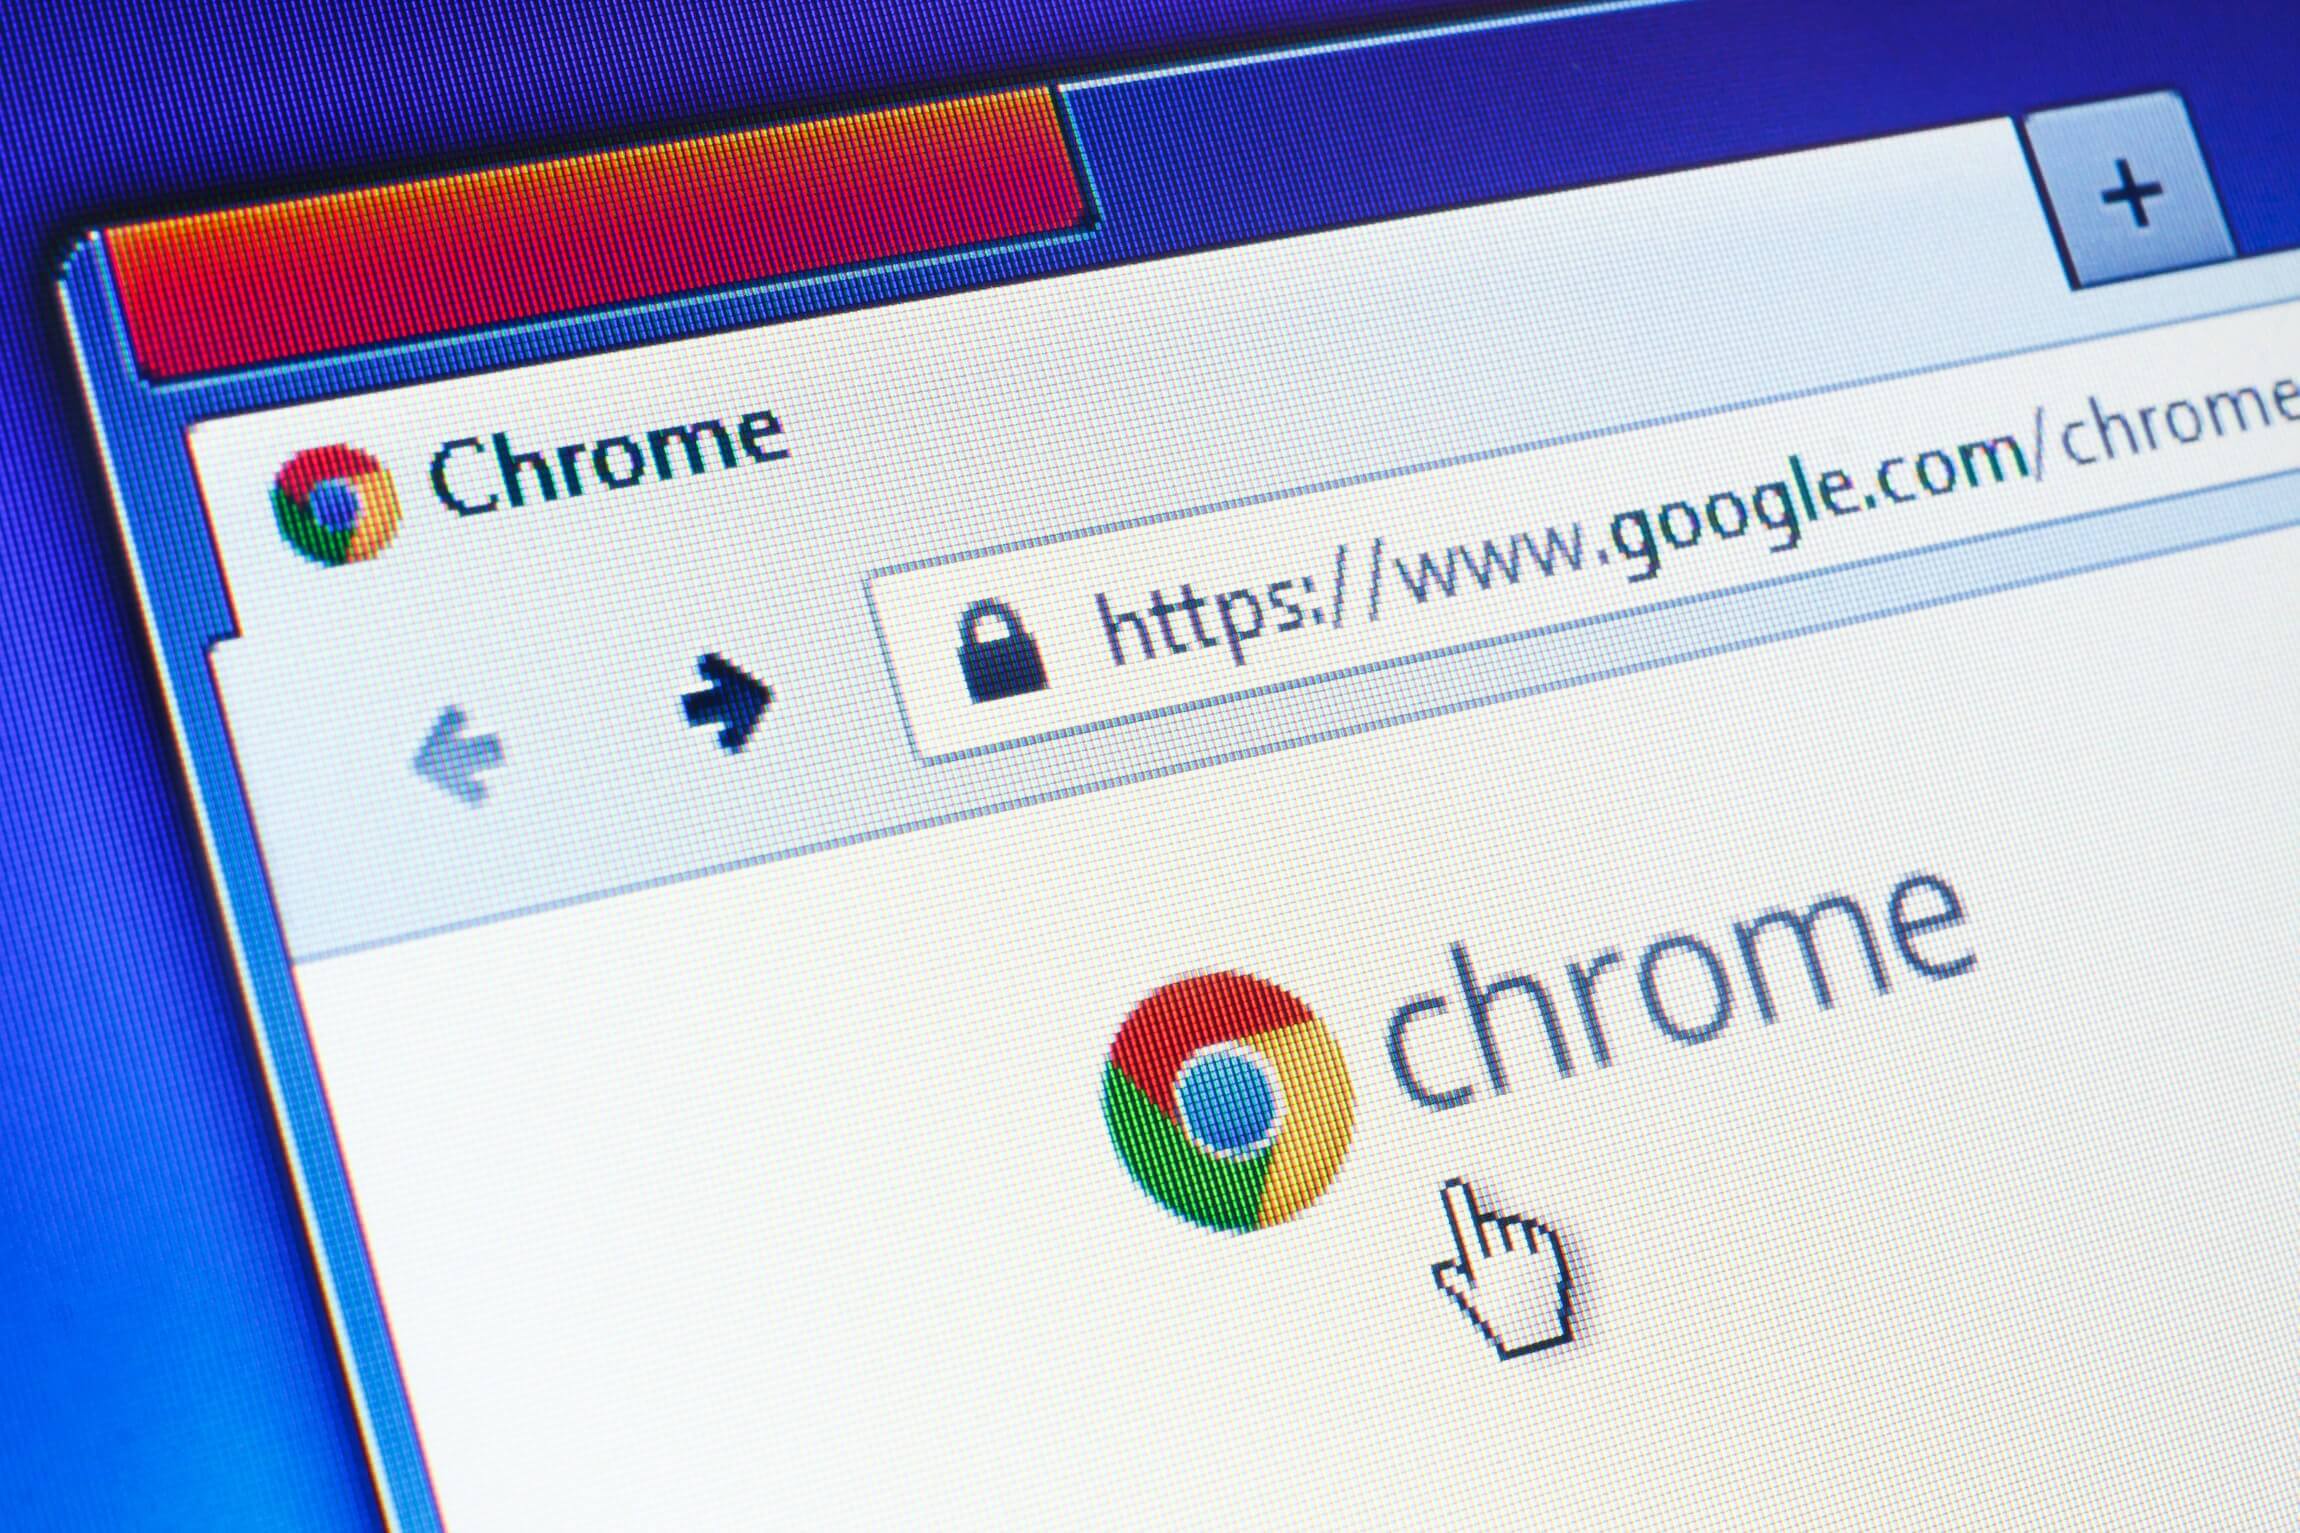 Experimental Chrome feature could improve battery life up to 28 percent